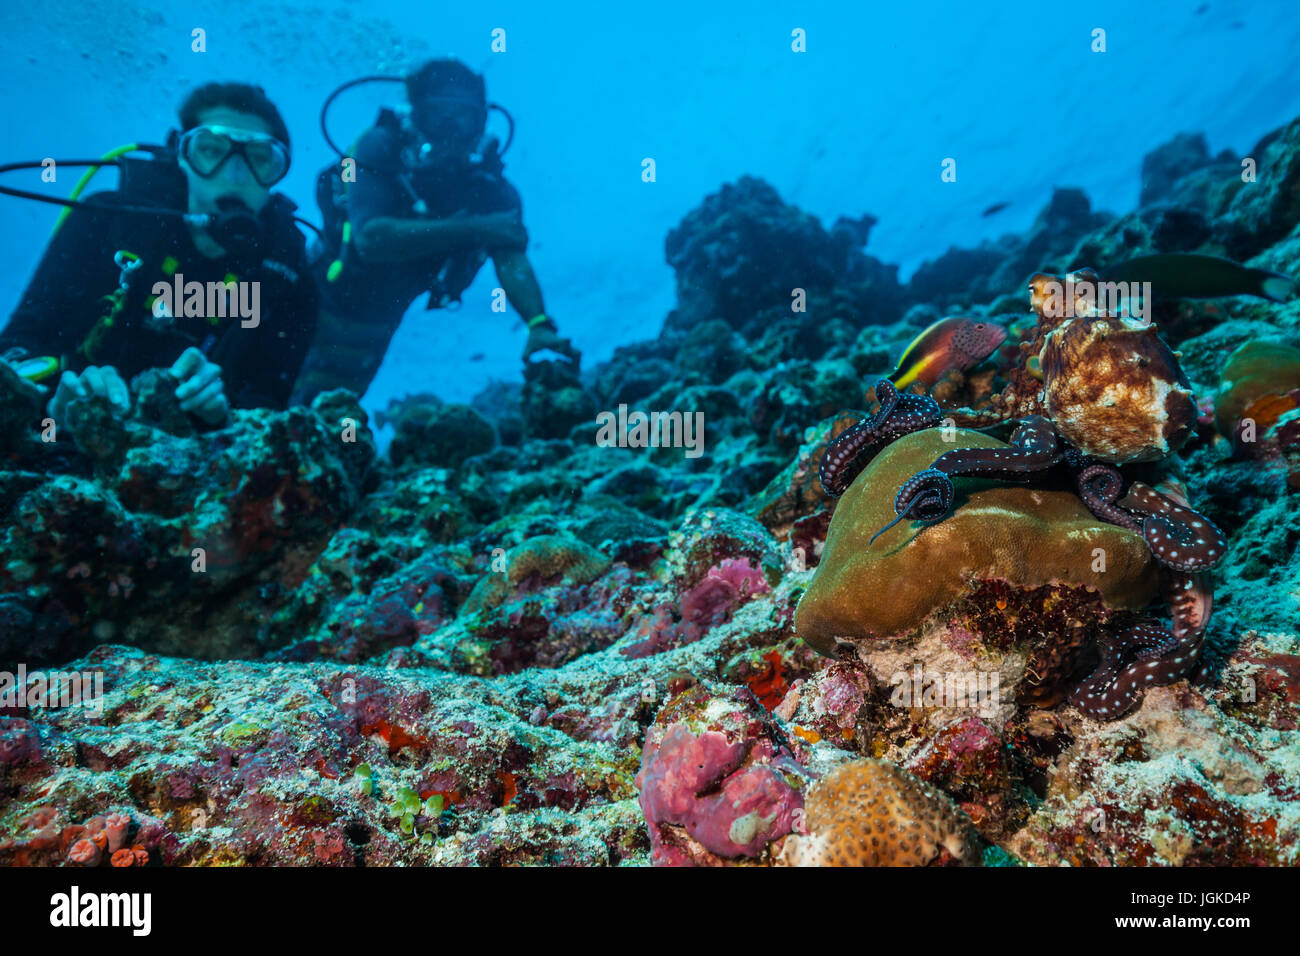 Two scuba divers exploring coral reef with octopus, Maldives atolls, Indian Ocean. Stock Photo